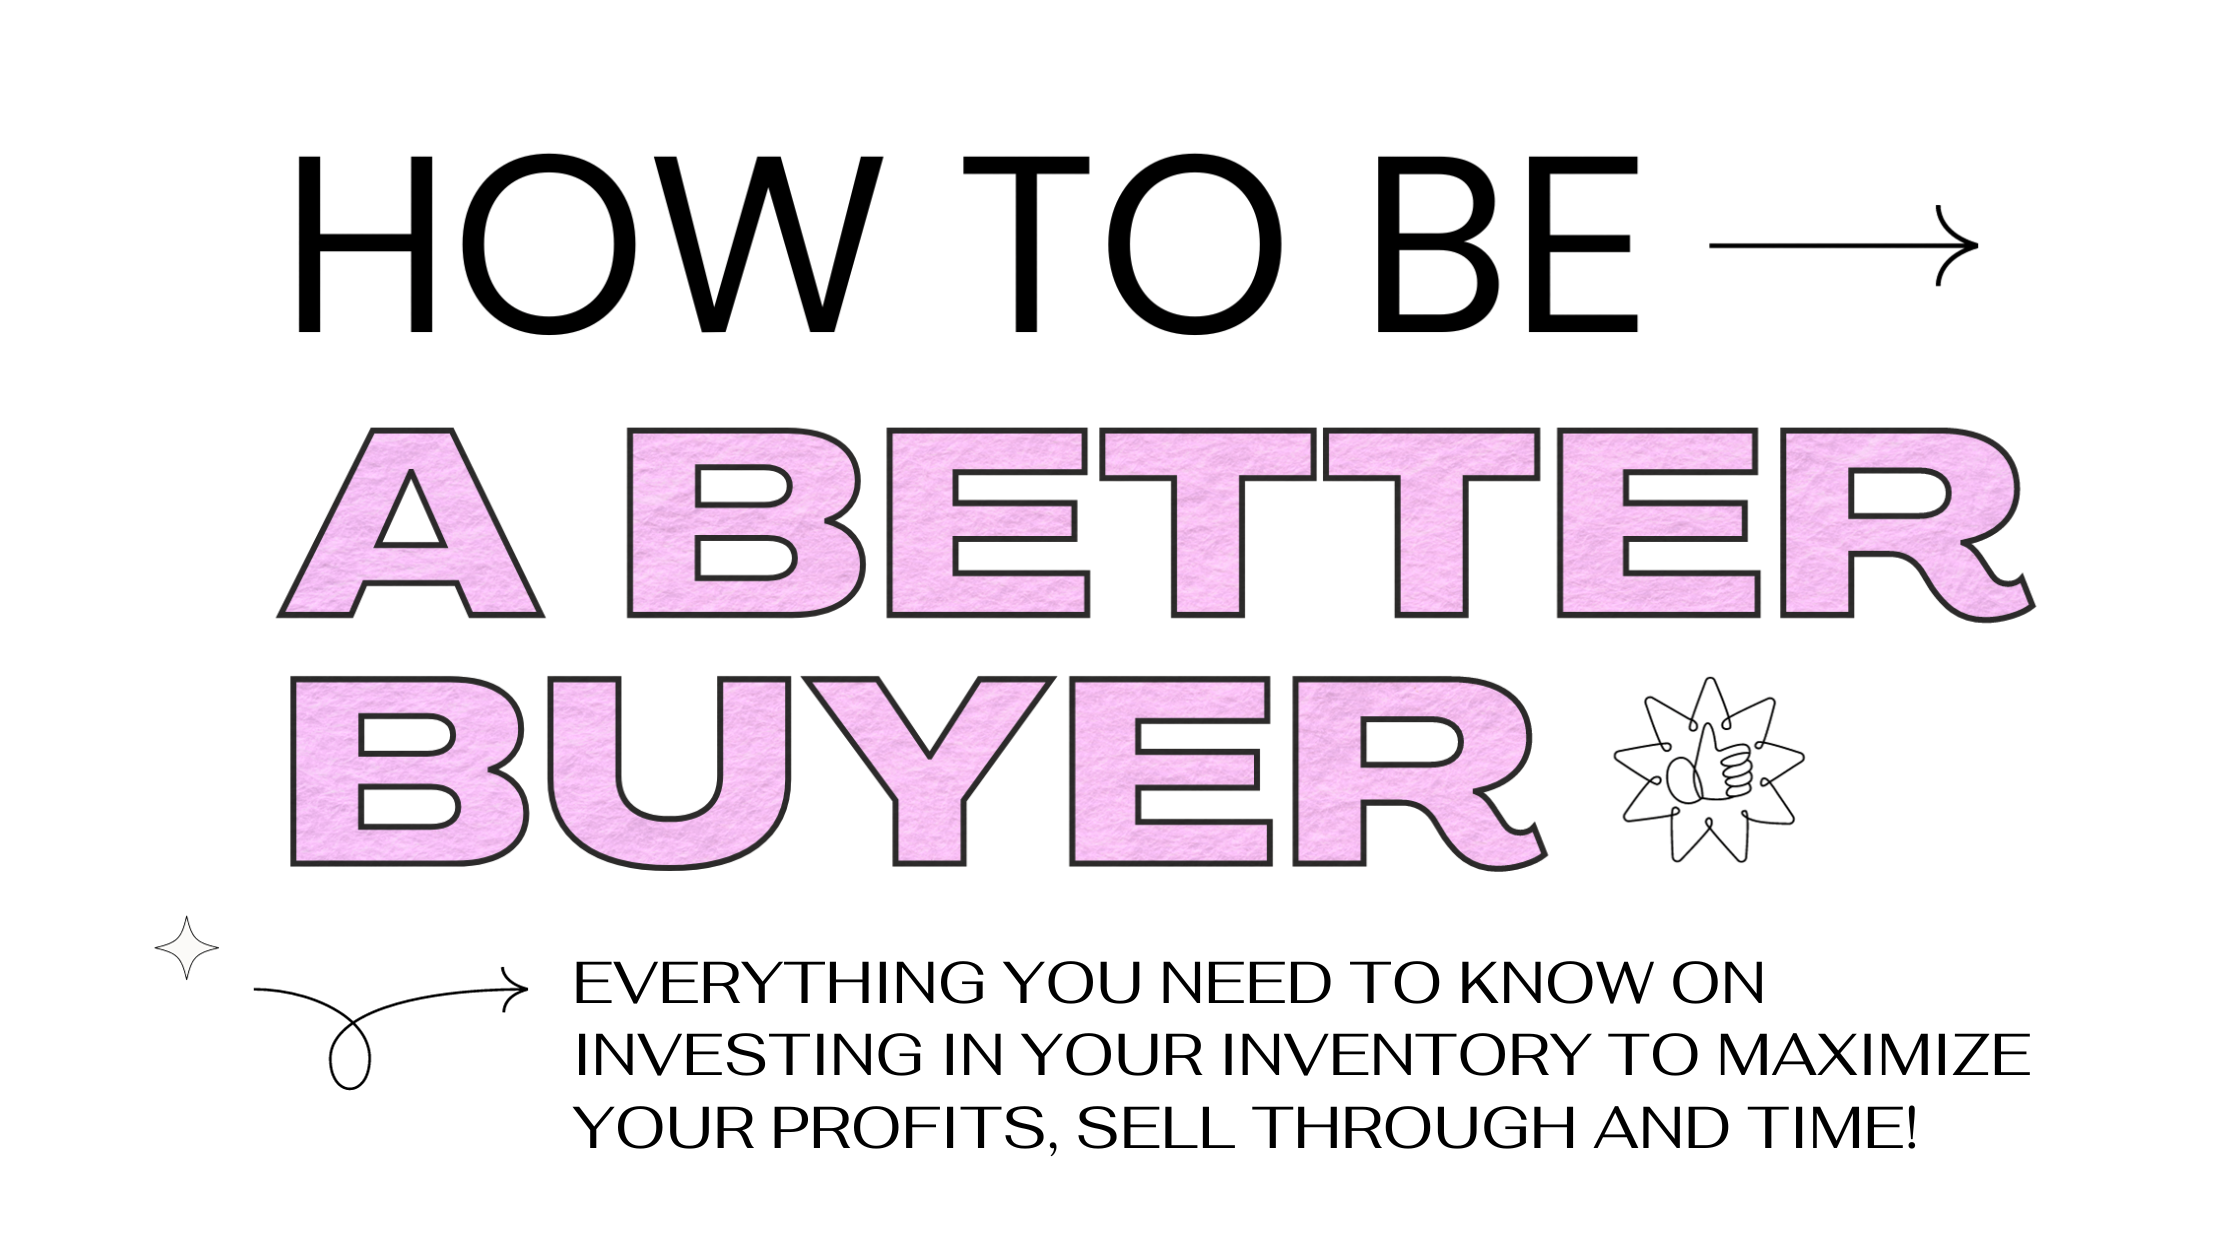 How to be a better buyer webinar. May 14, 10am